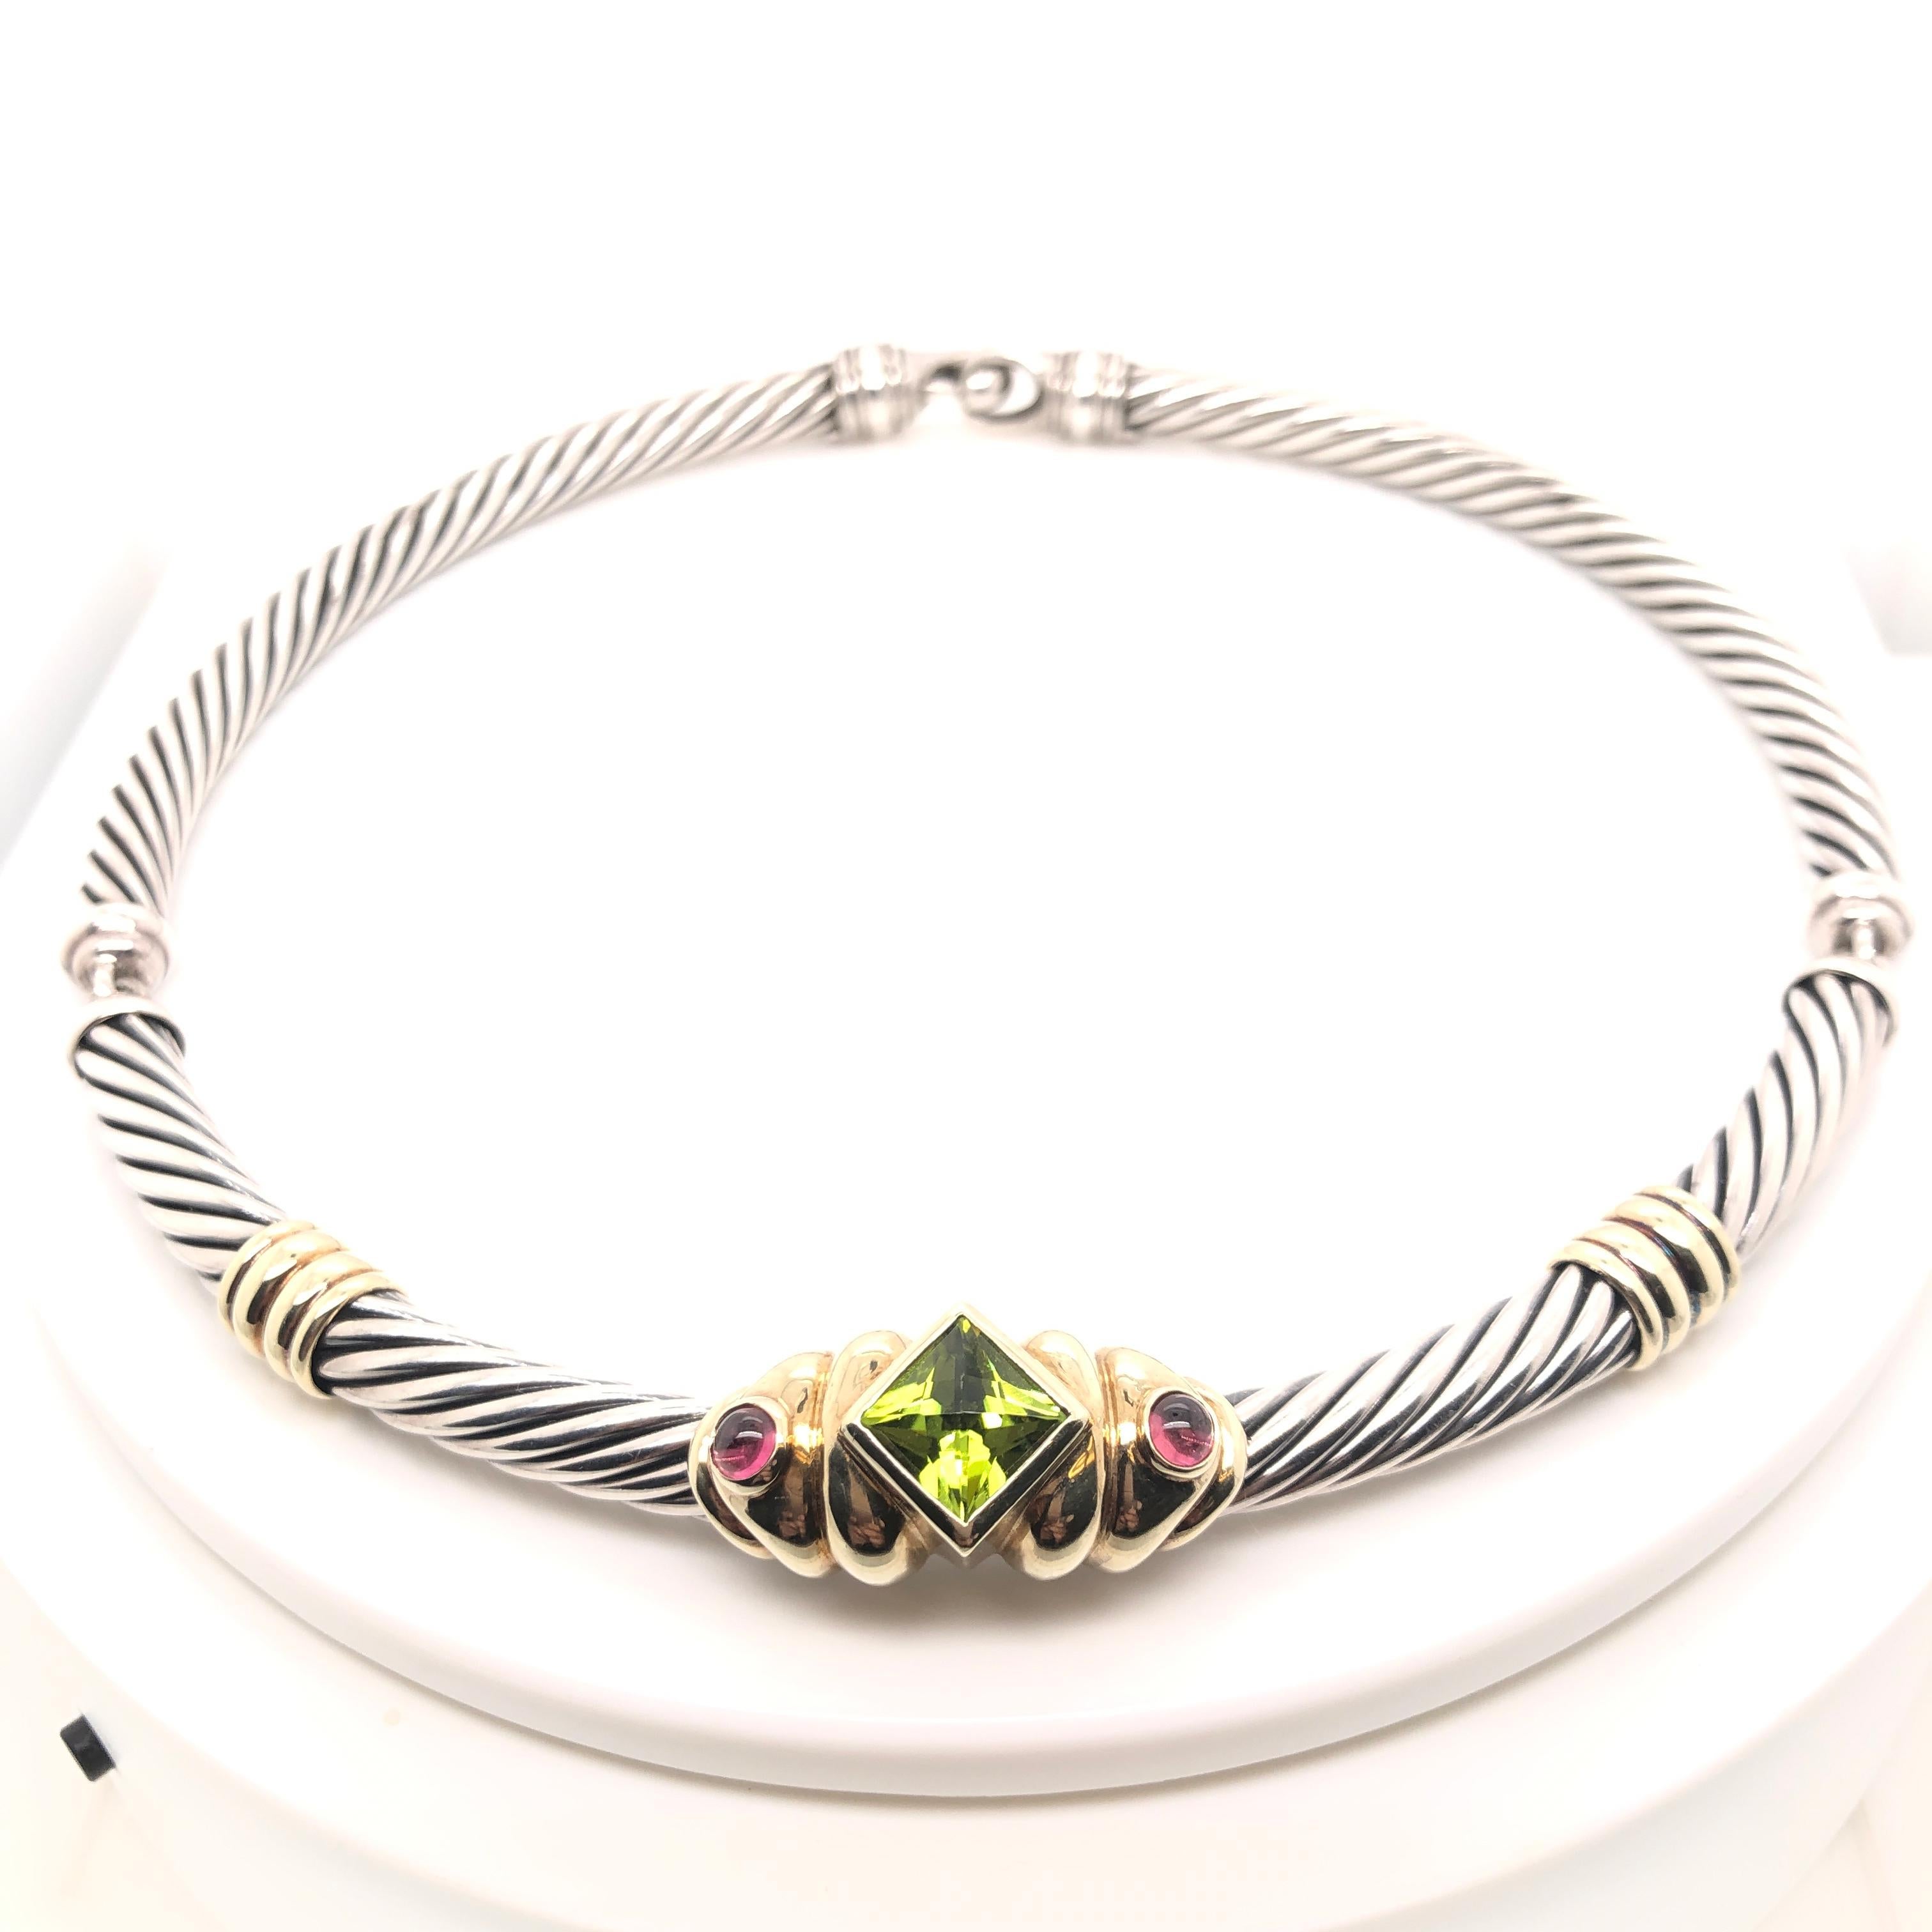 18K yellow gold and sterling silver cable collar necklace including peridot and pink tourmaline.

Stamped: © D. Y. 925, 585

